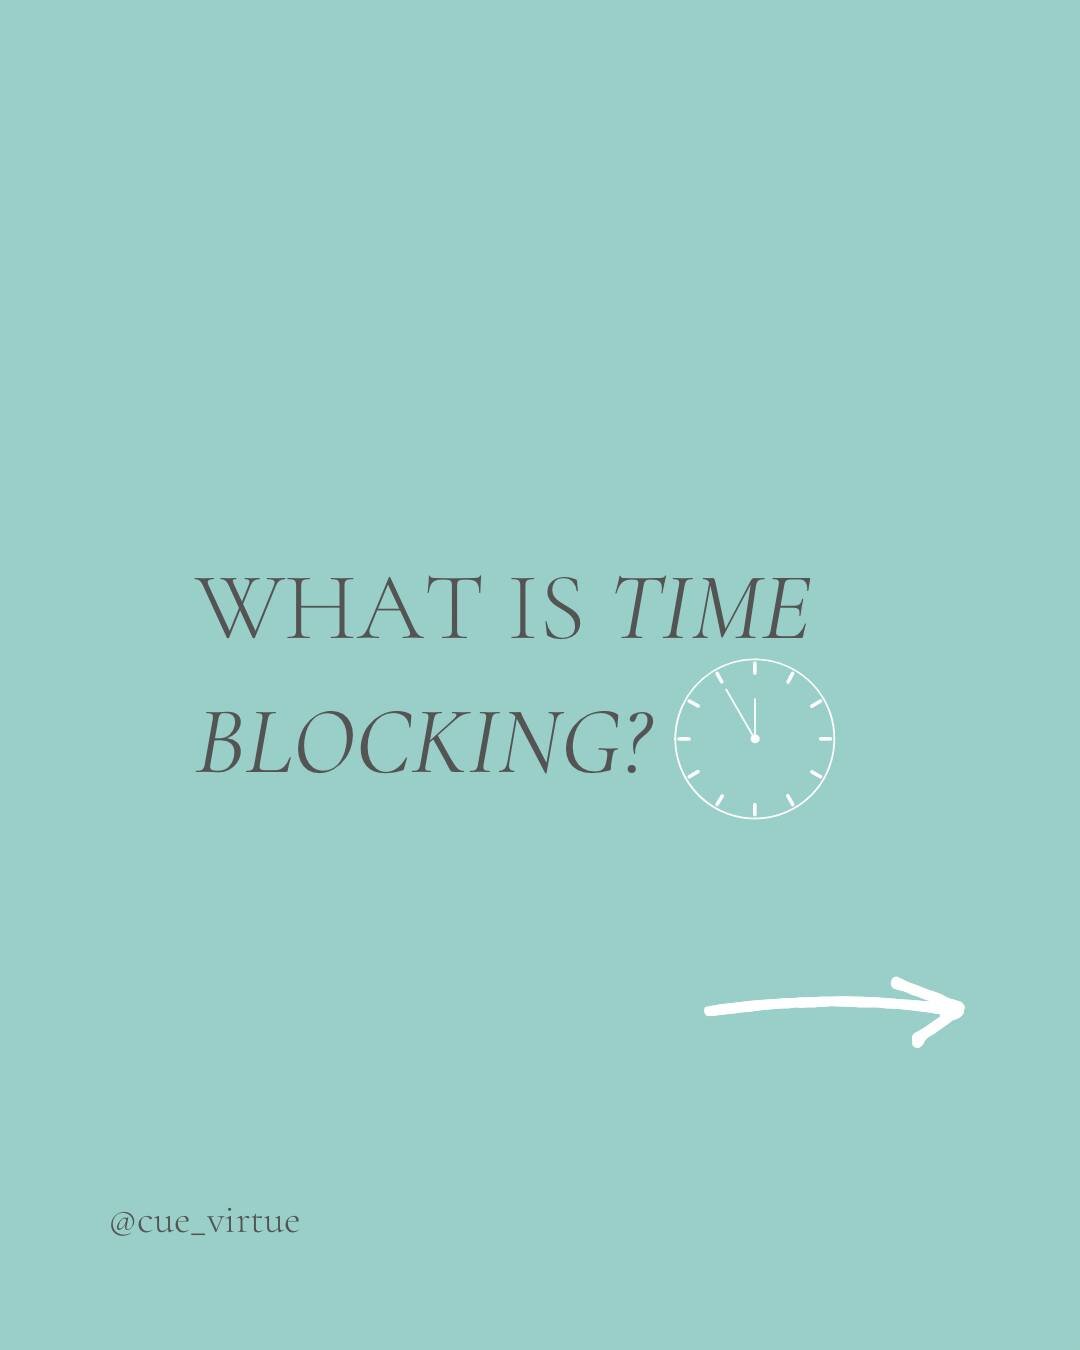 ⏰ Do you use time blocking in your business? 

☑️ Time blocking is a great way to help businesses stay organized and productive. 

💫 It helps to separate tasks into manageable chunks and prevents procrastination by providing a structure for completi